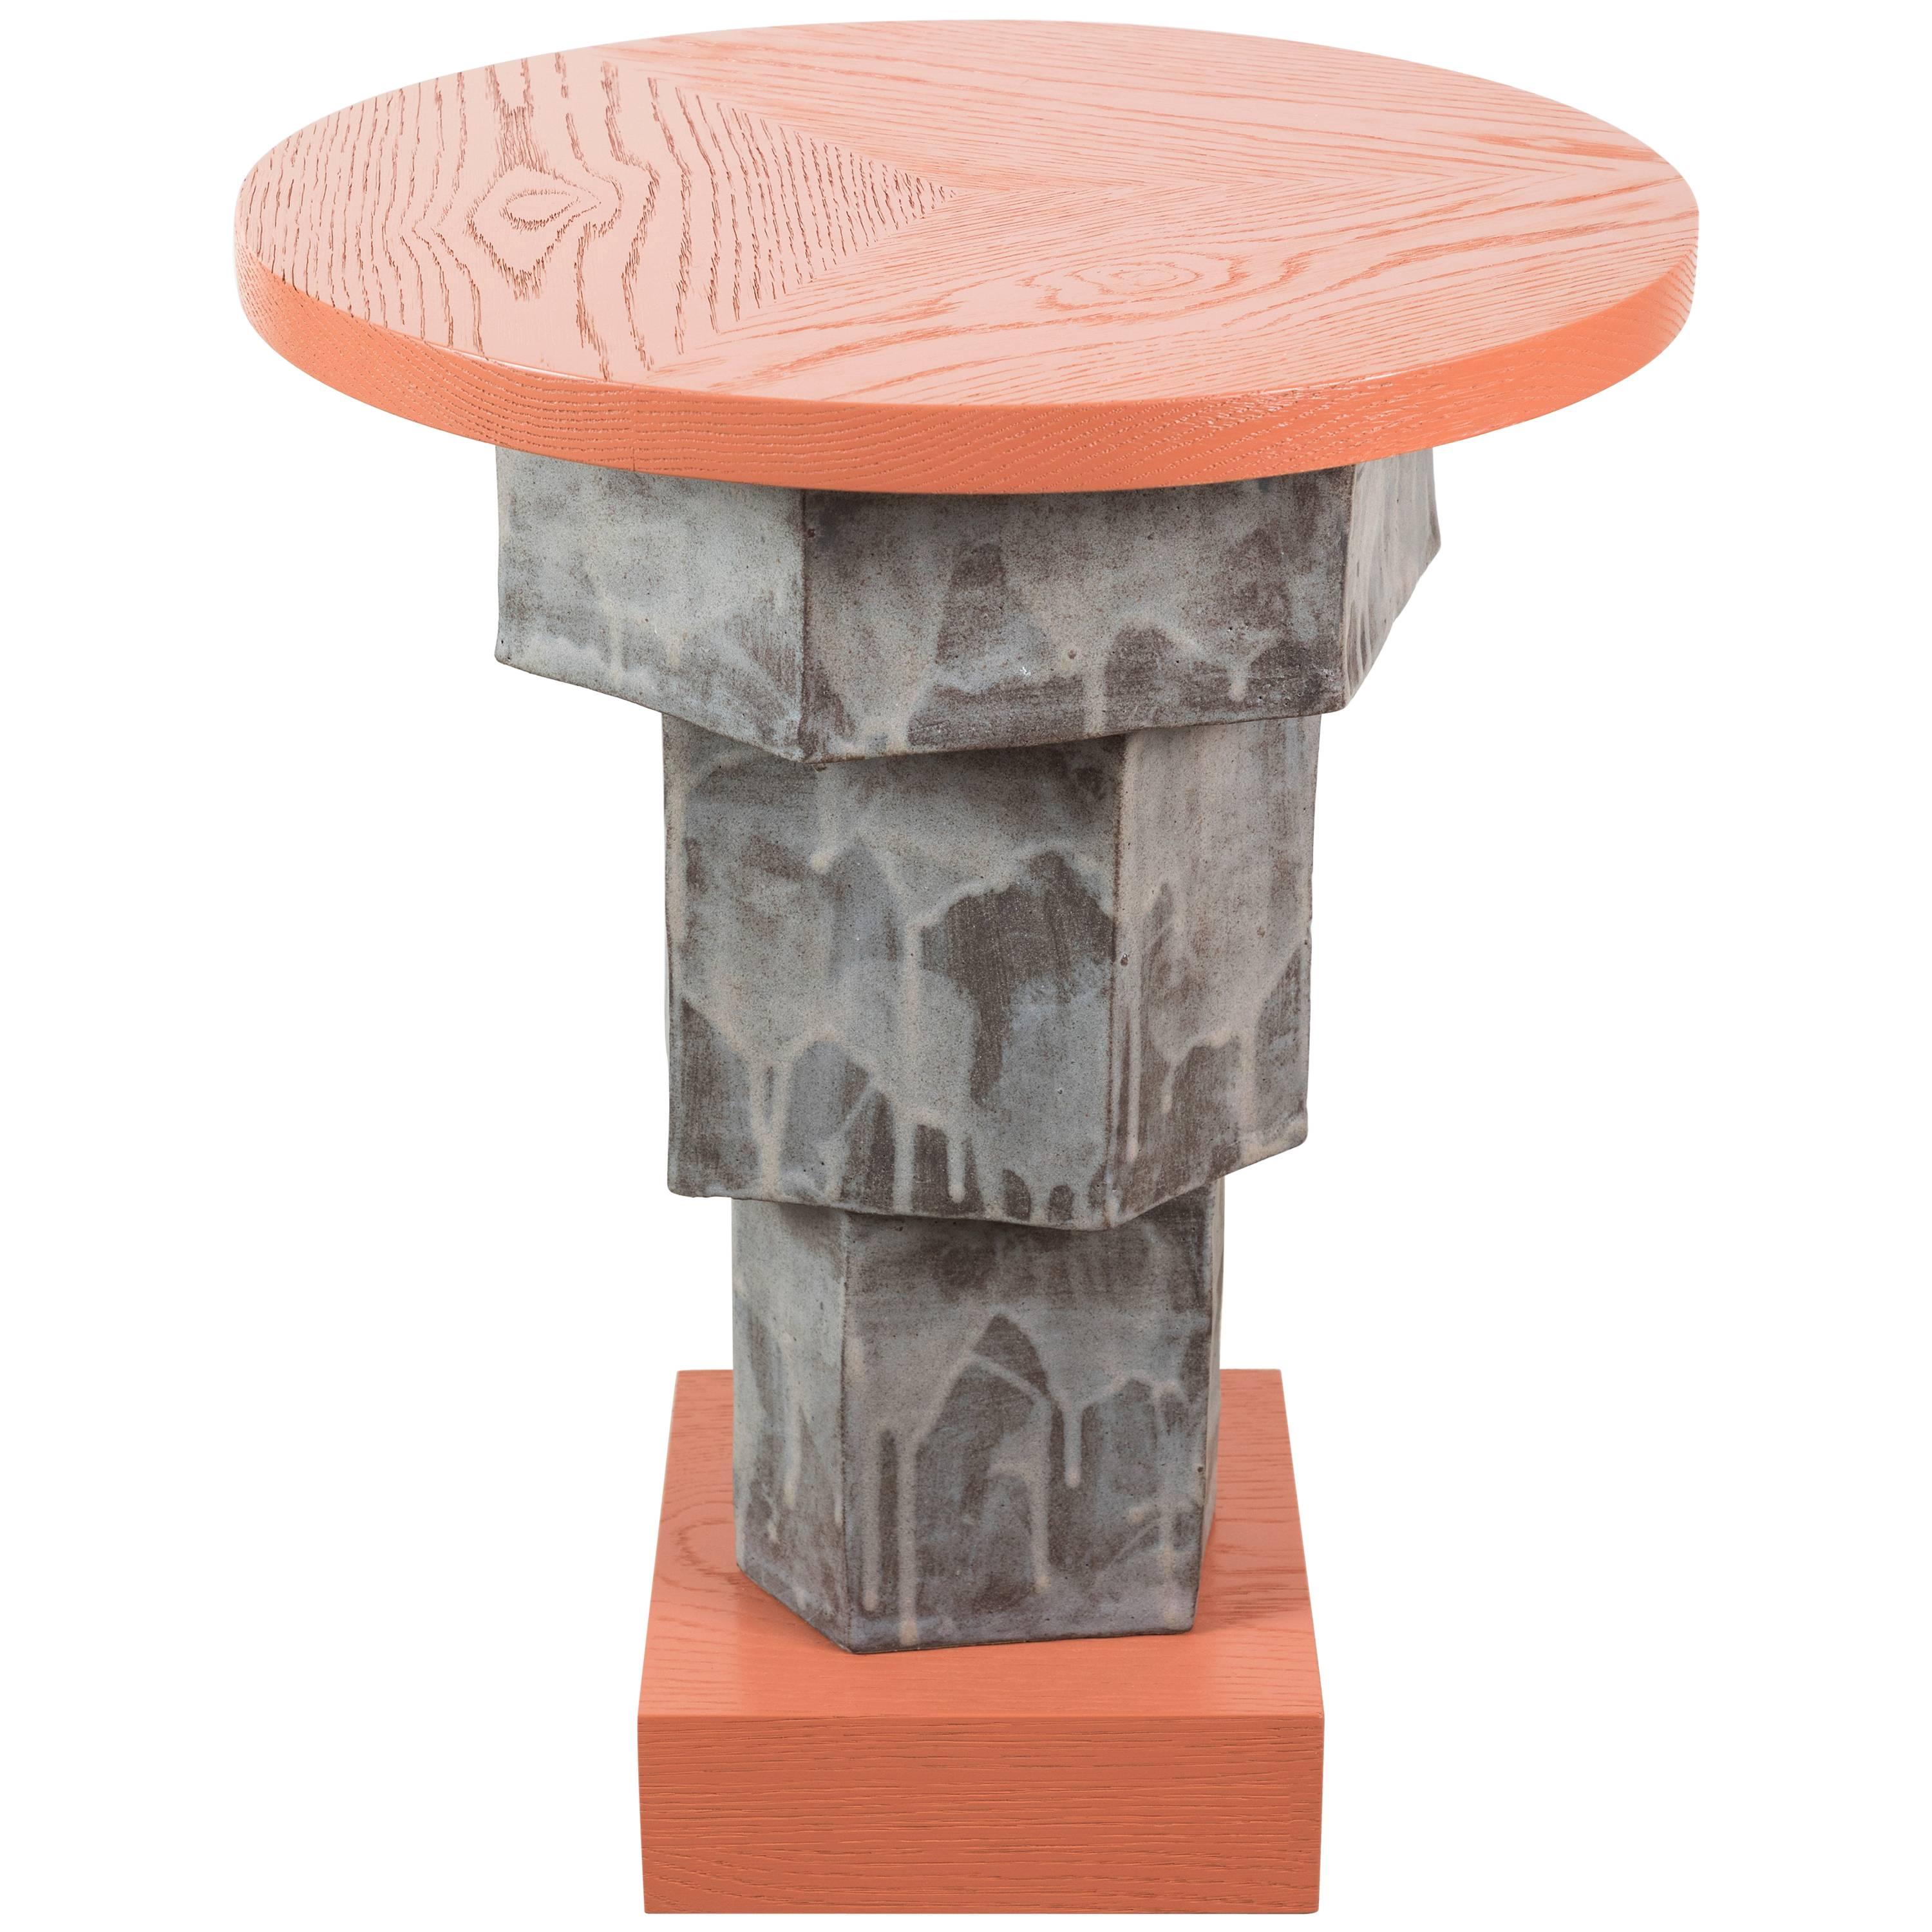 Solid Oak and Ceramic Side Table by BZippy & Co. for Collabs in Clay